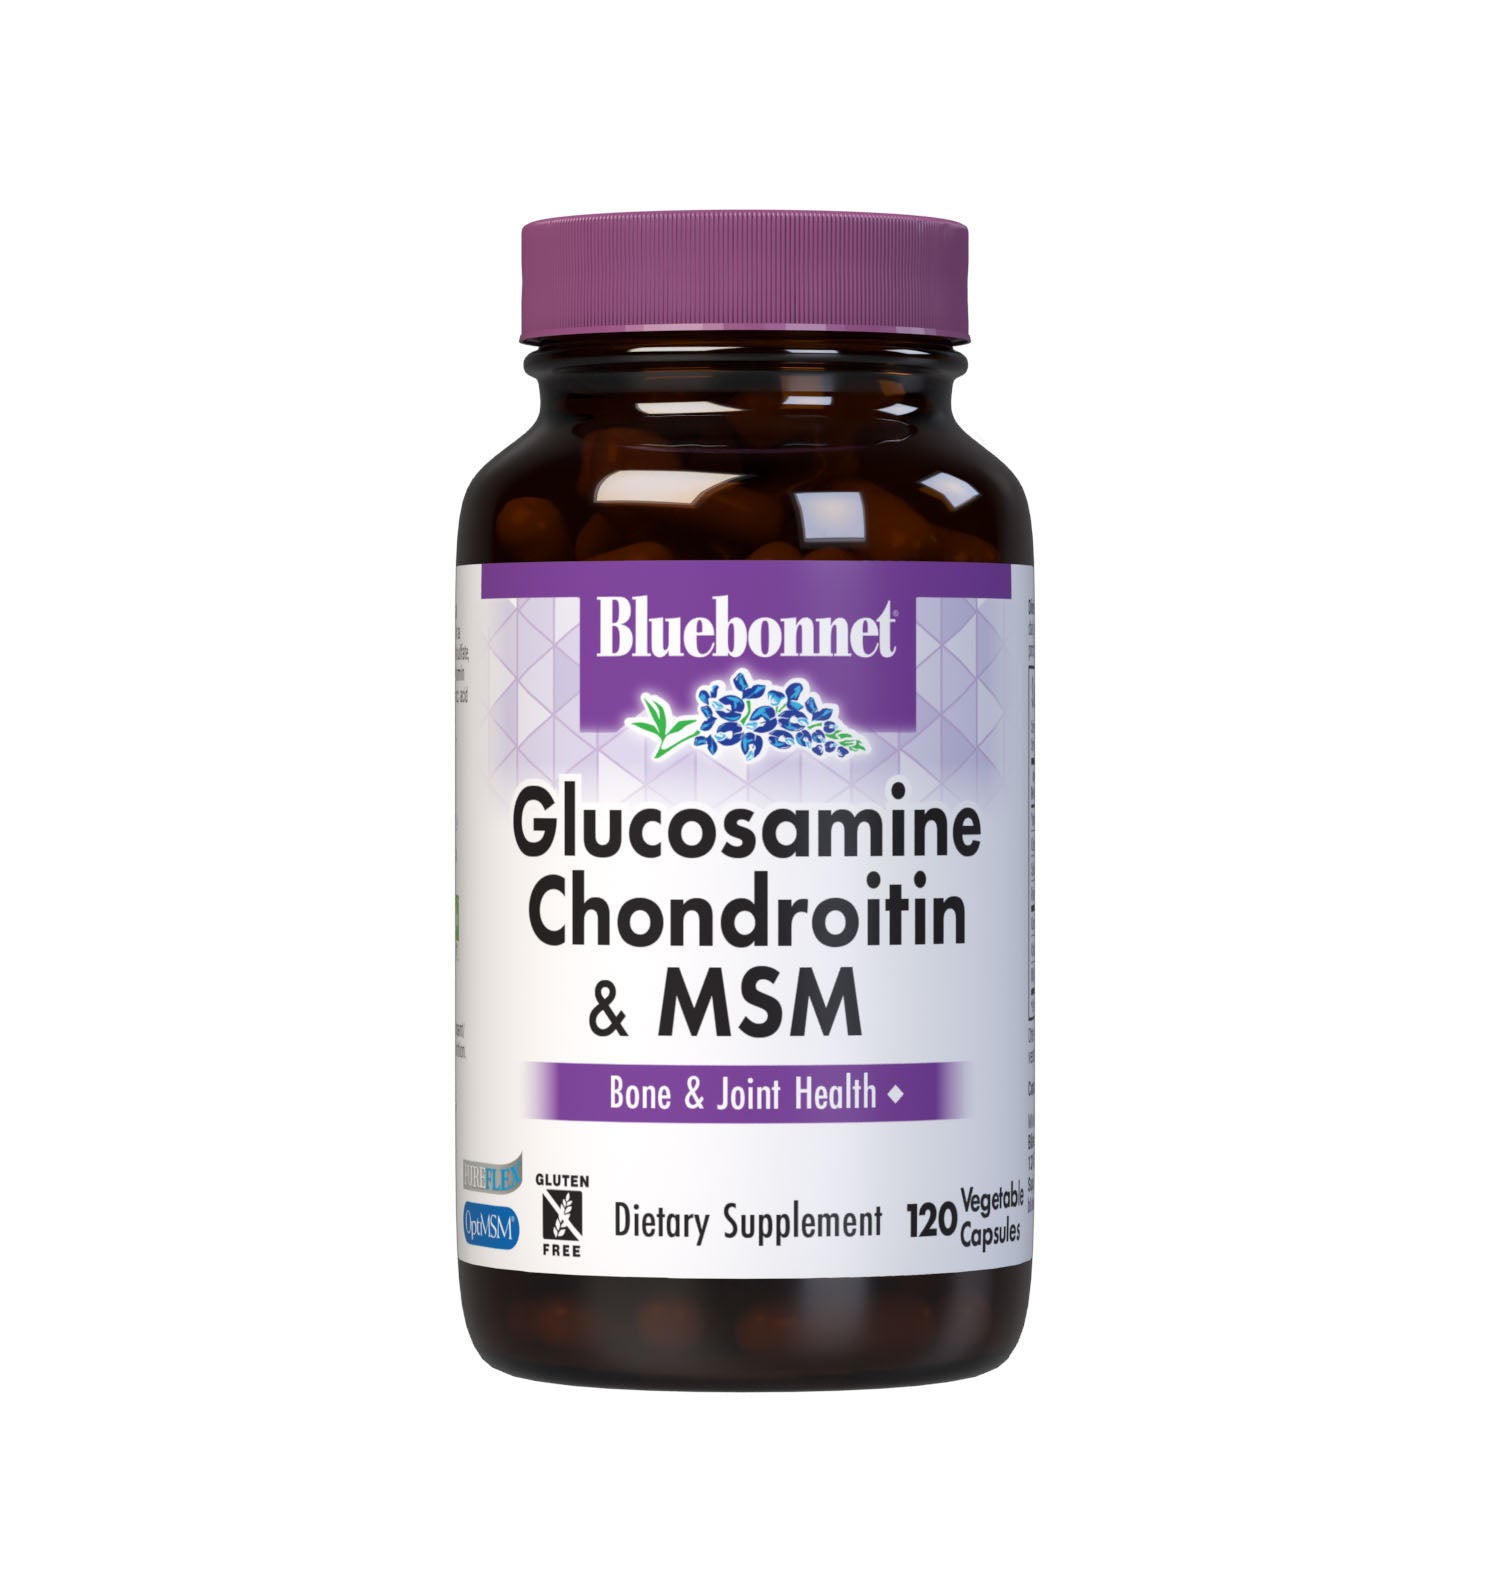 Bluebonnet’s Glucosamine Chondroitin Sulfate & MSM 120 Vegetable Capsules are specially formulated with a combination of glucosamine sulfate, chondroitin sulfate, OptiMSM an active form of sulfur, as well as vitamin C from Identity-Preserved (IP) L-ascorbic acid for optimal joint health.  #size_120 count